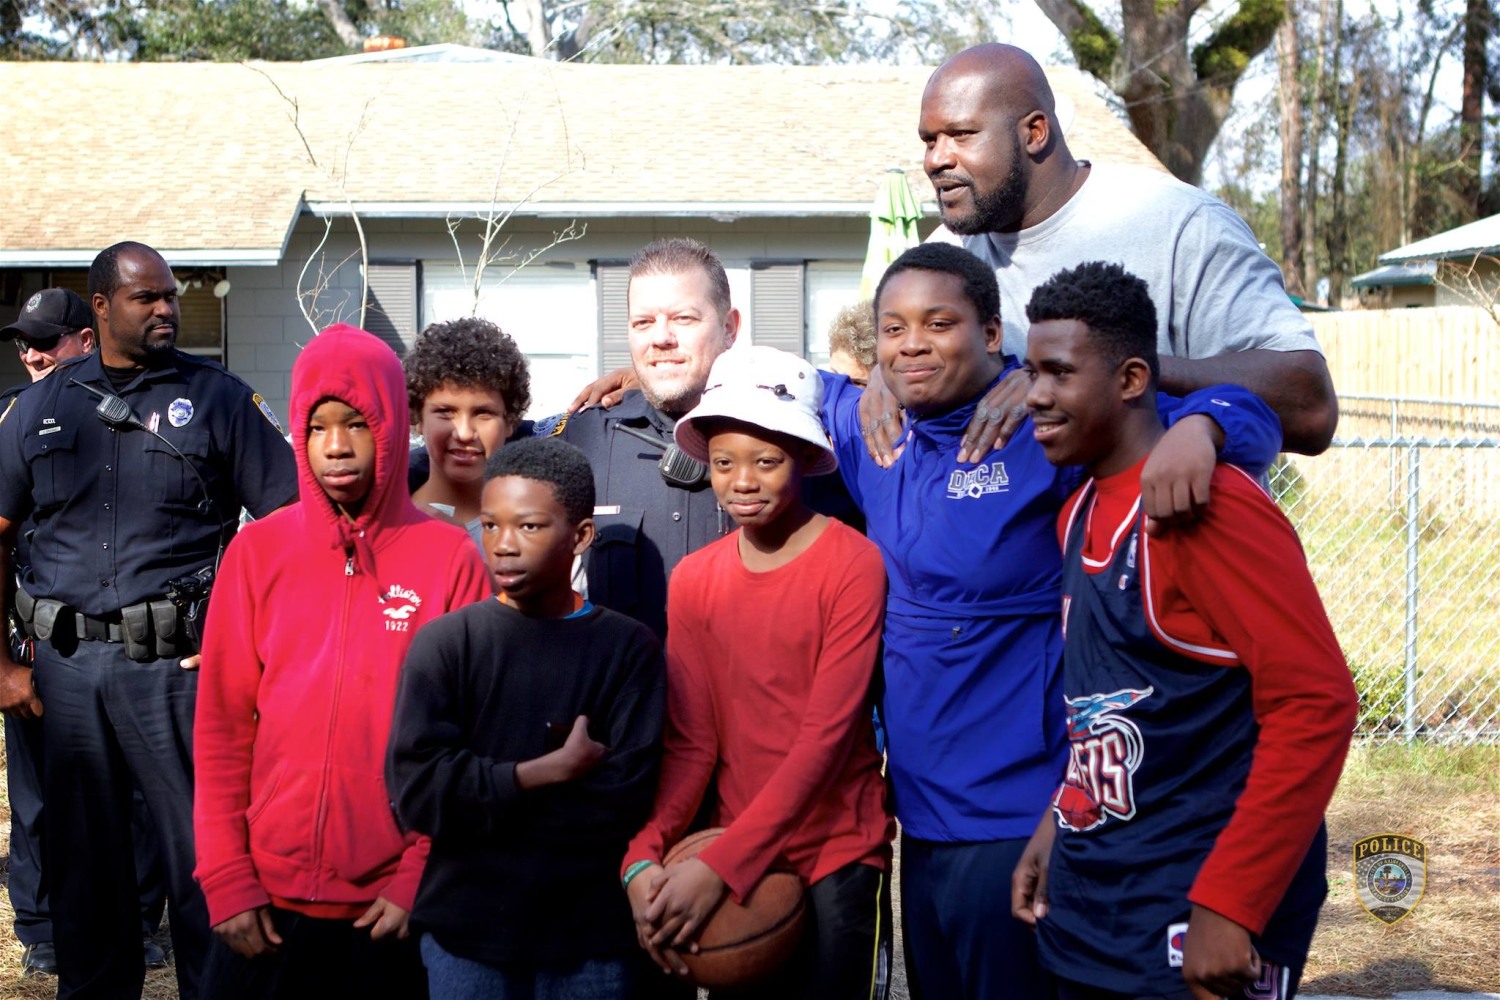 Shaq Surprises Florida Cop for Pickup Game With Kids After Viral Hoops Video - NBC News